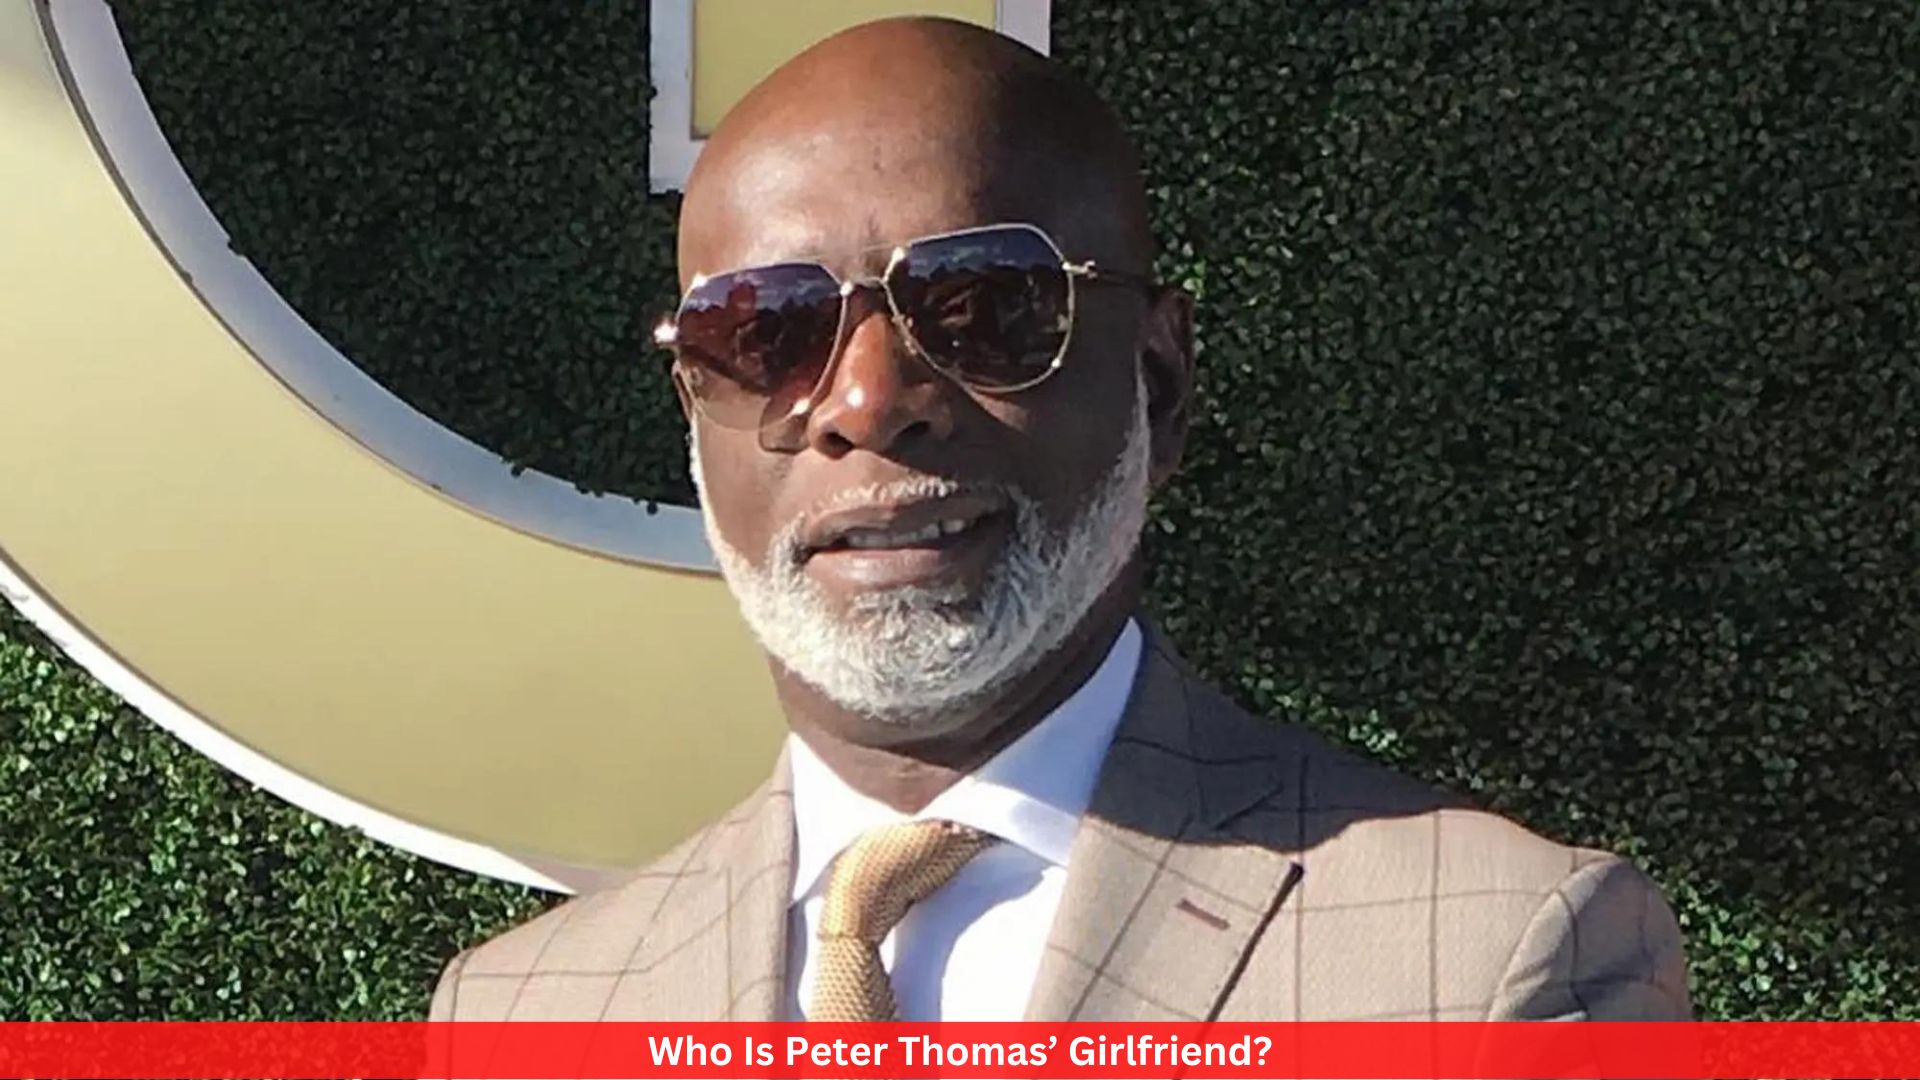 Who Is Peter Thomas’ Girlfriend?